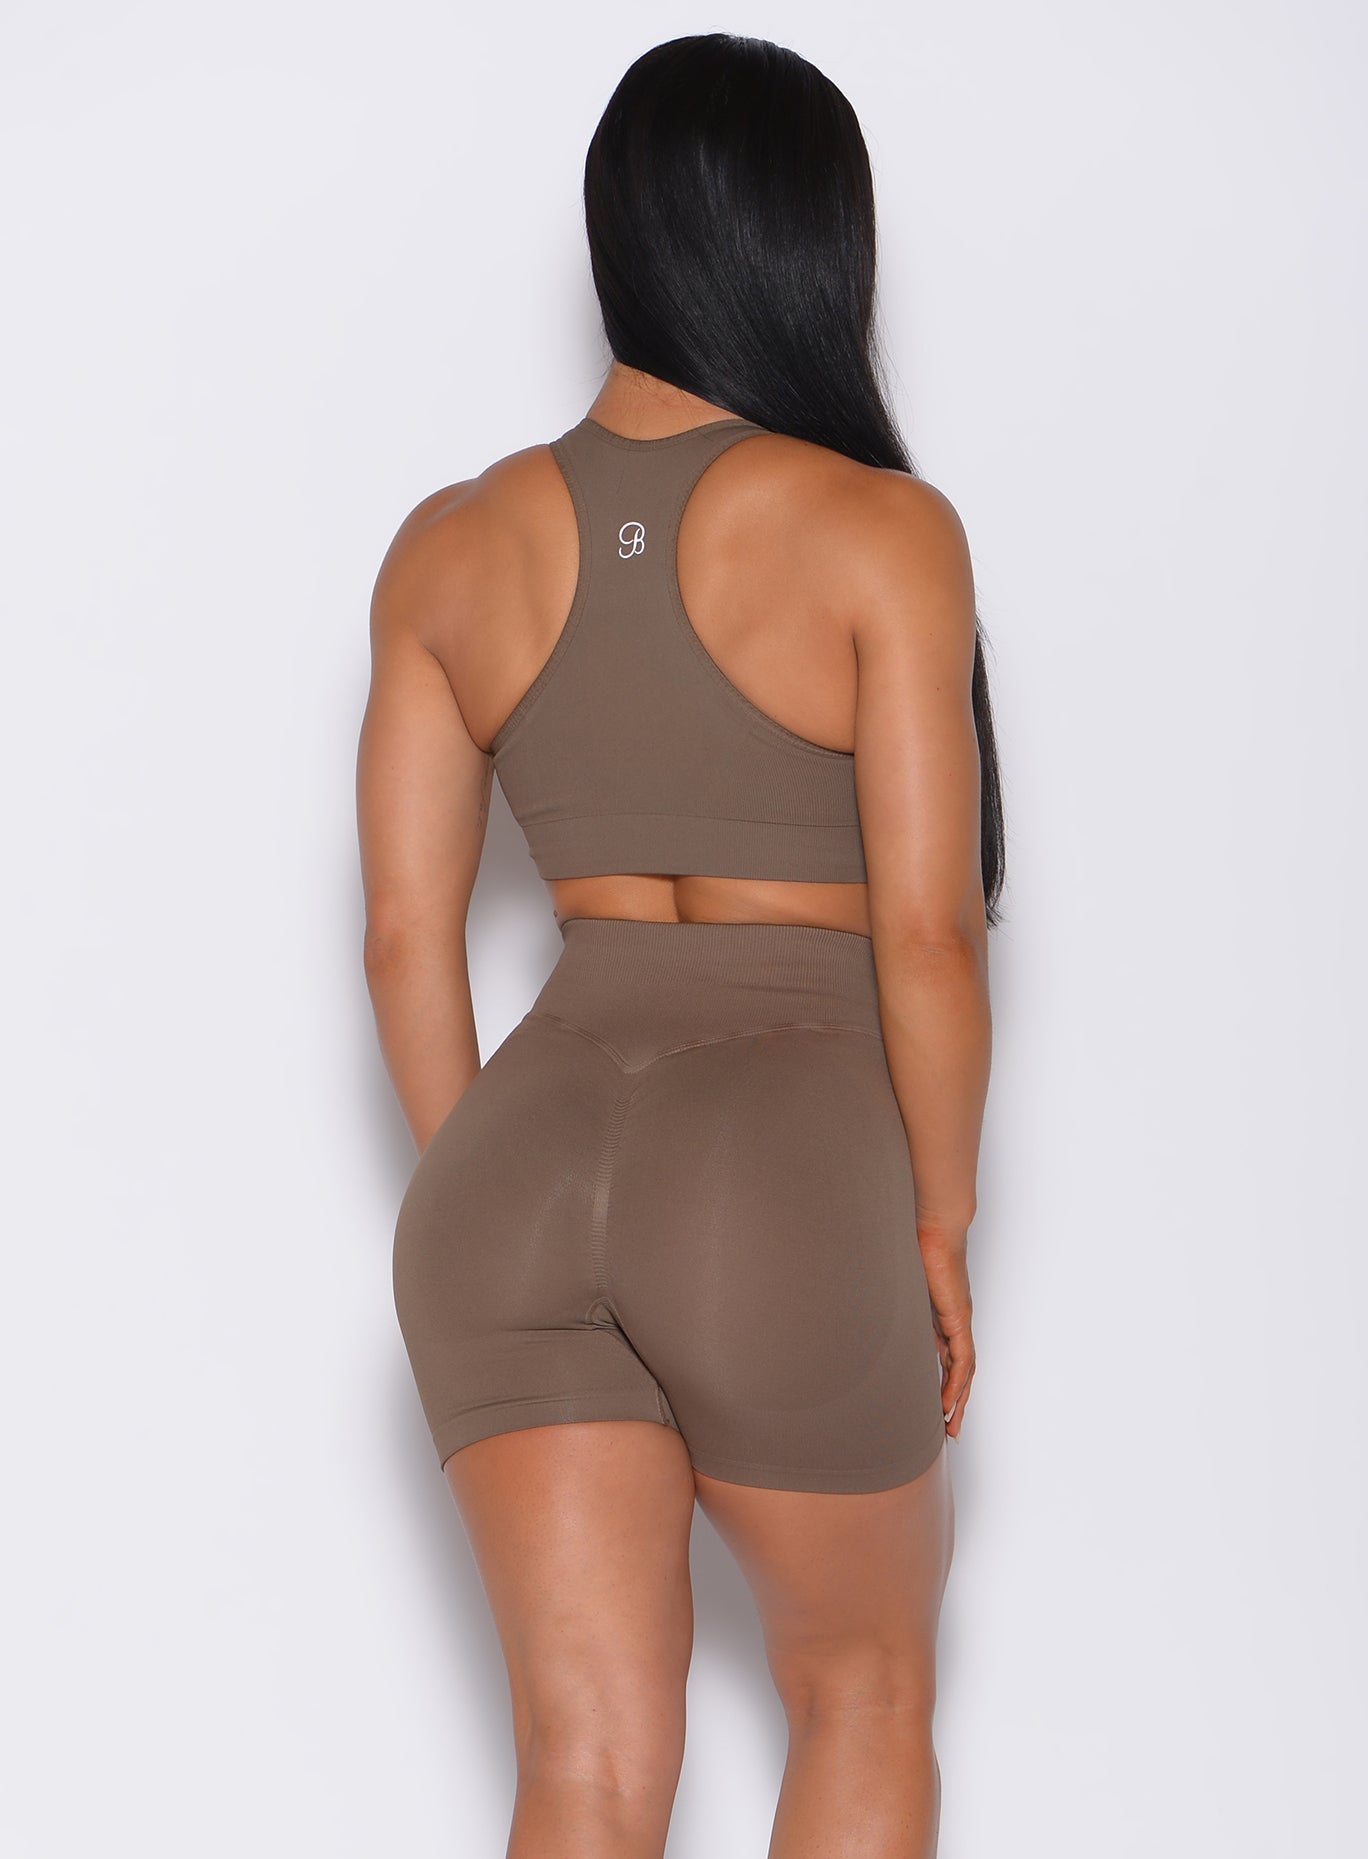 back profile view of a model wearing our smooth seamless bra in beachwood color along with the matching shorts